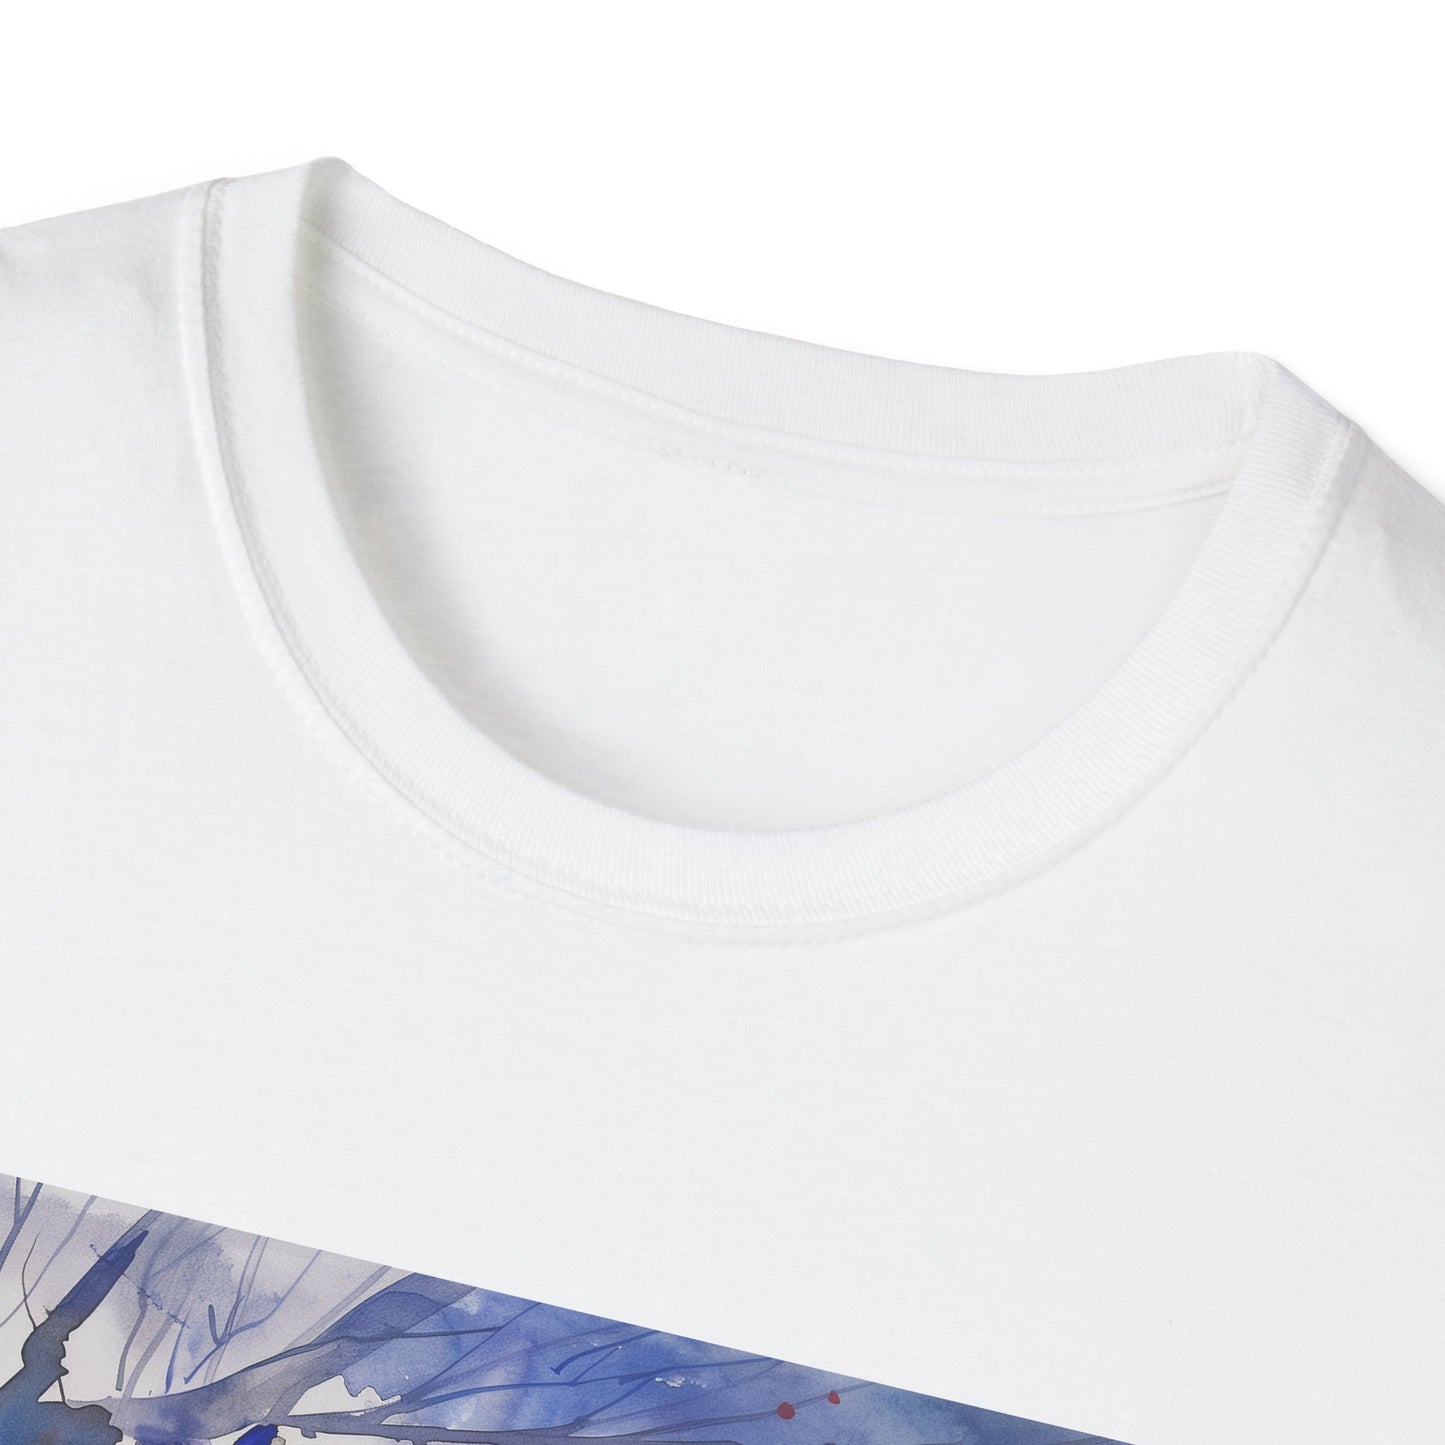 ## Parisian Icon in Watercolor: The Eiffel Tower T-shirt